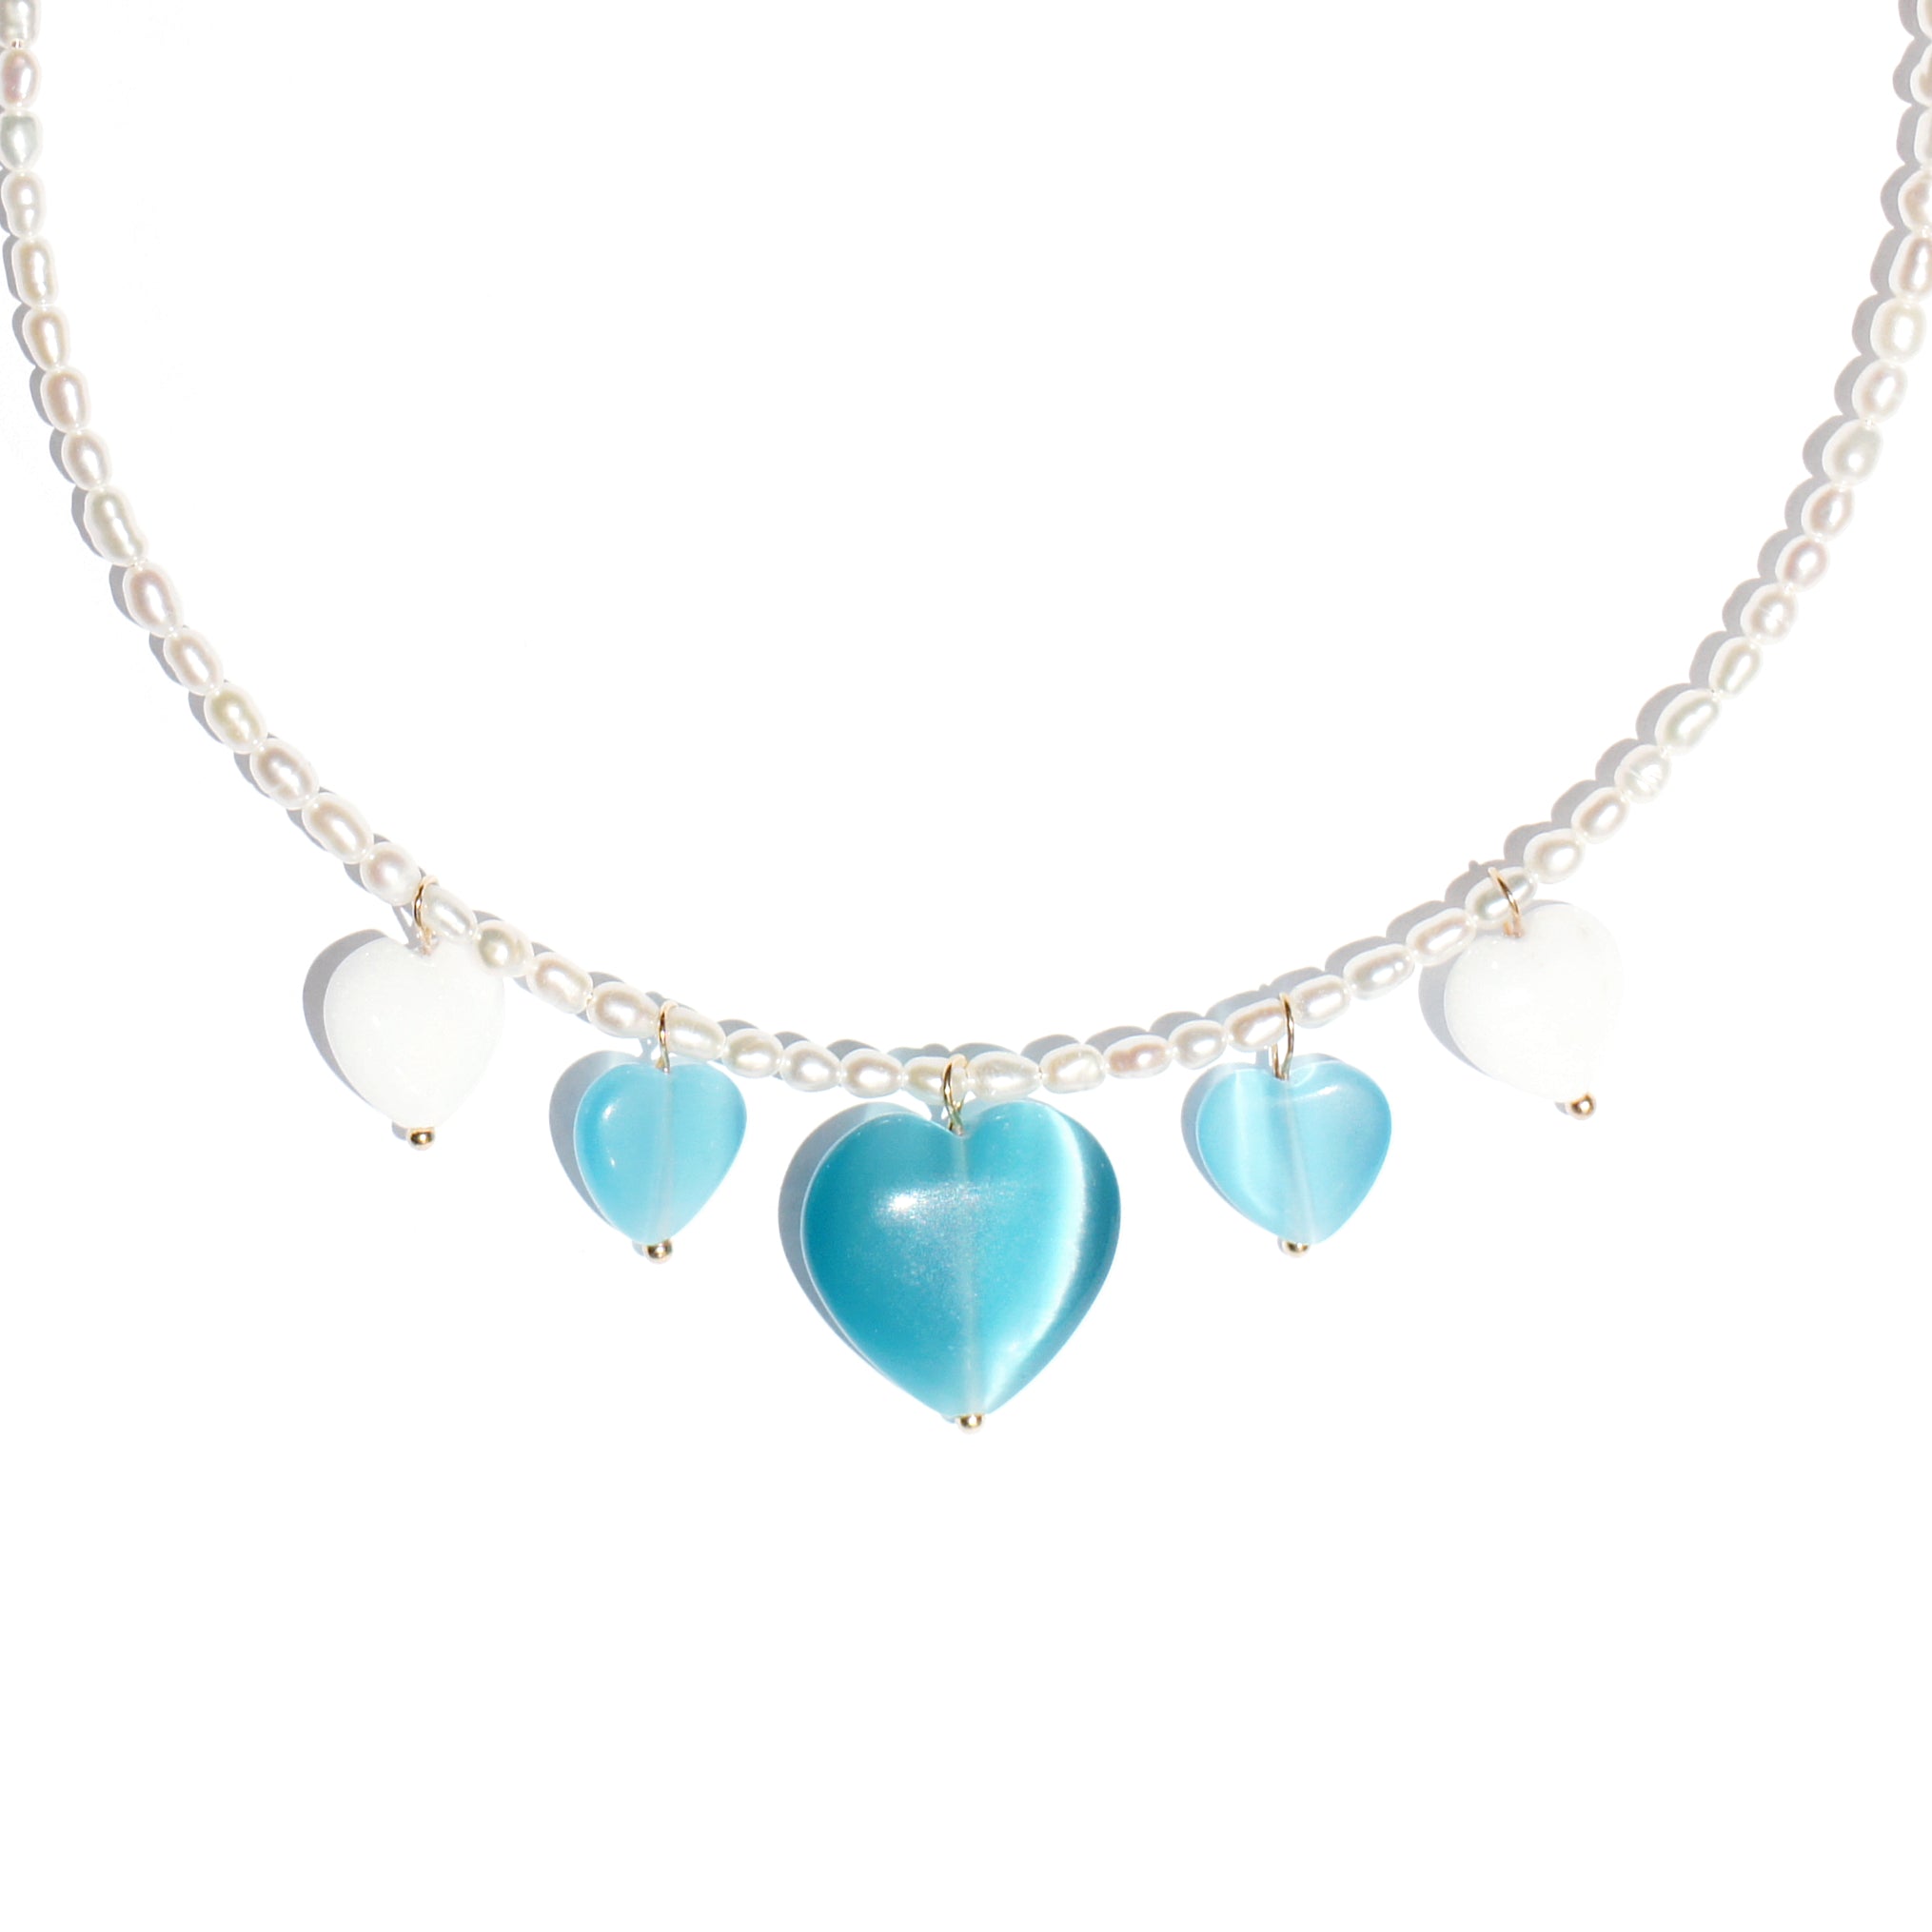 Serenity Freshwater Pearl Open Choker Necklace with Heart Charms